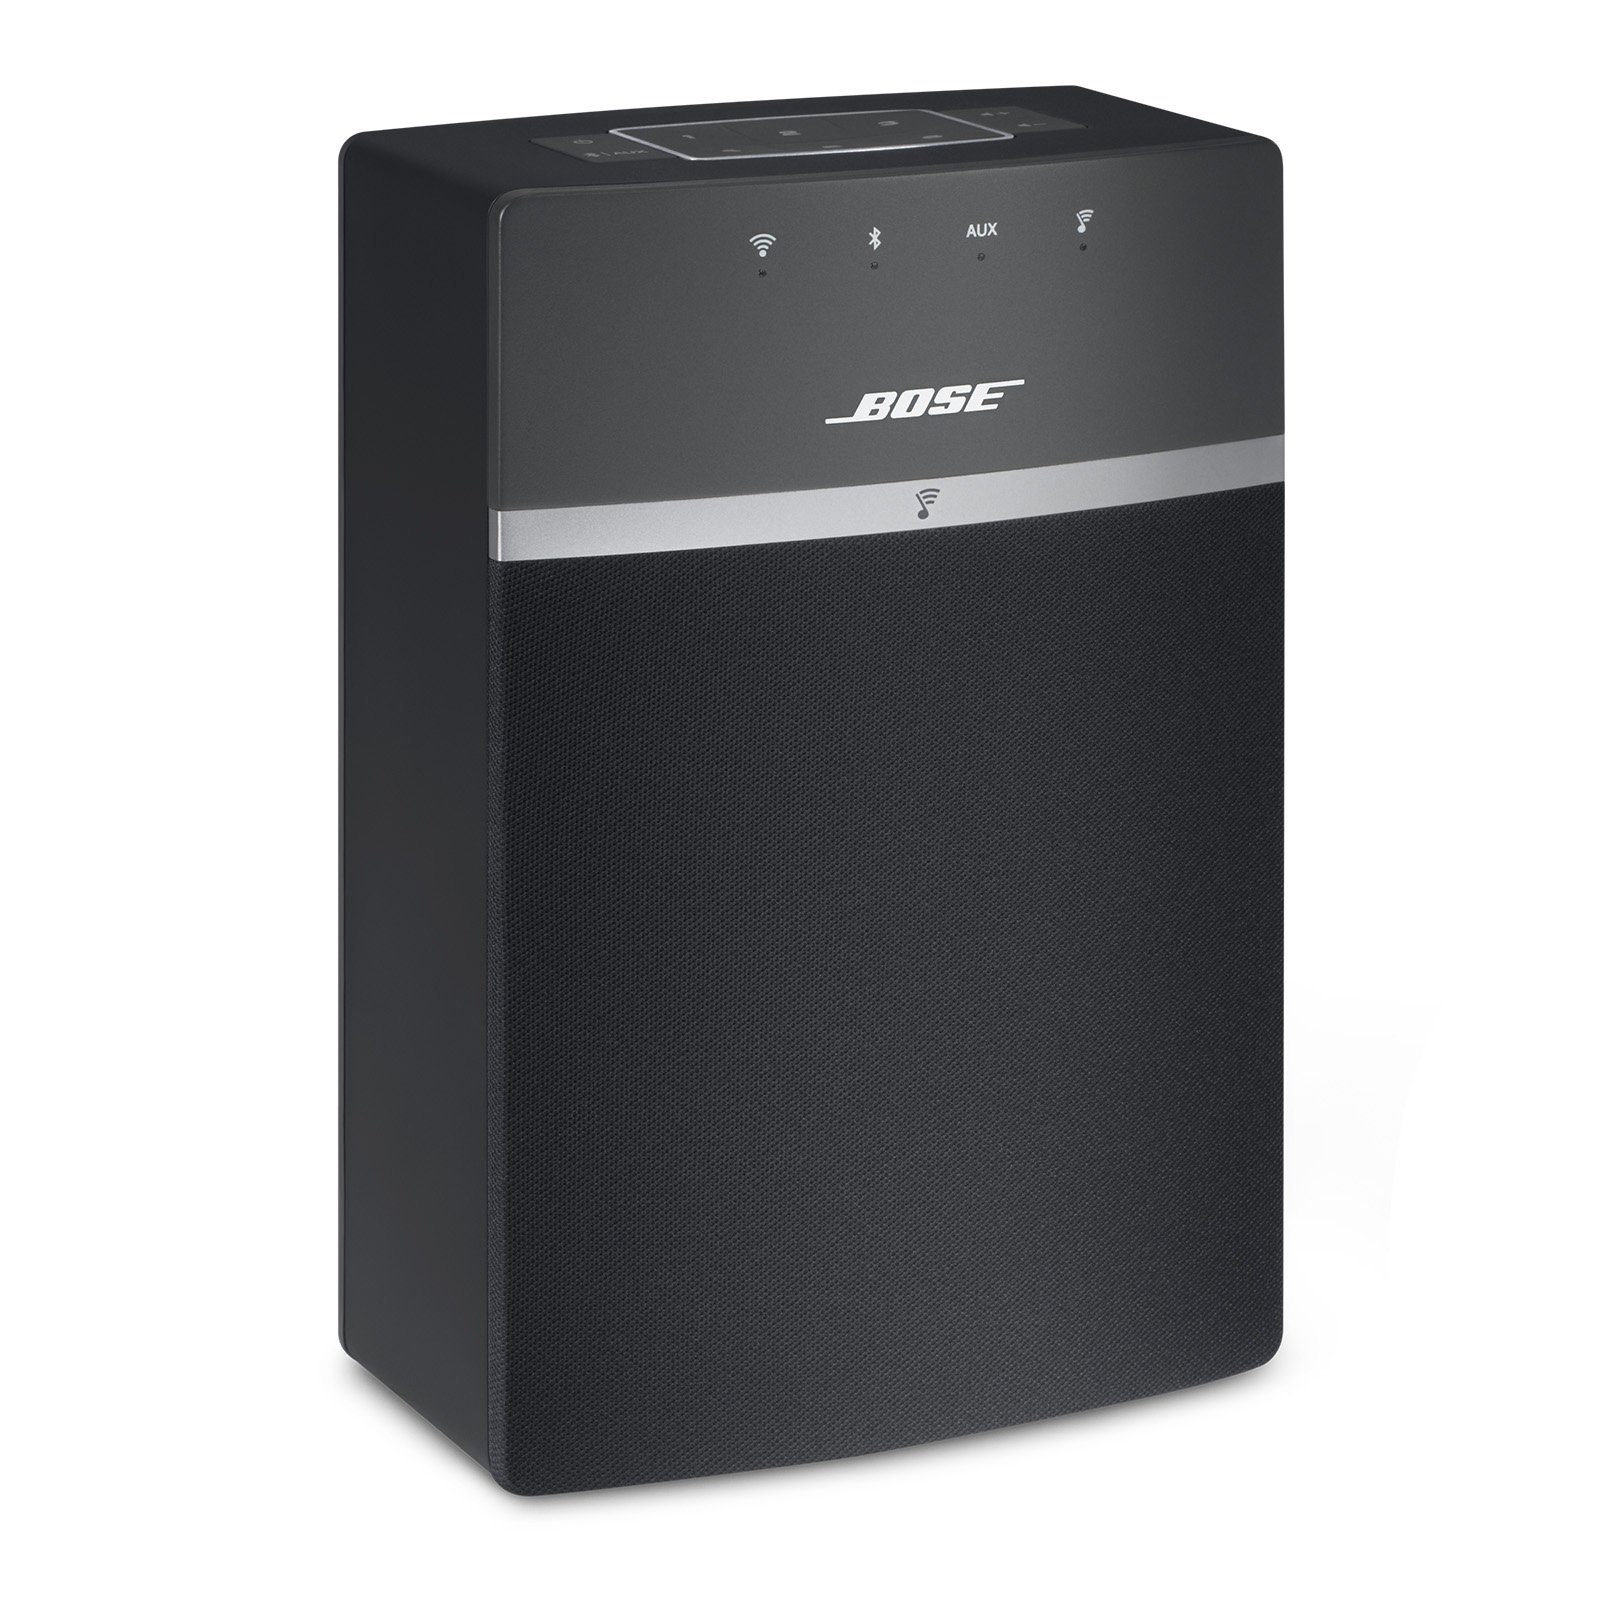 Make sure your SoundTouch 10 speaker is powered on.
Check that the speaker is within range of your Wi-Fi network.